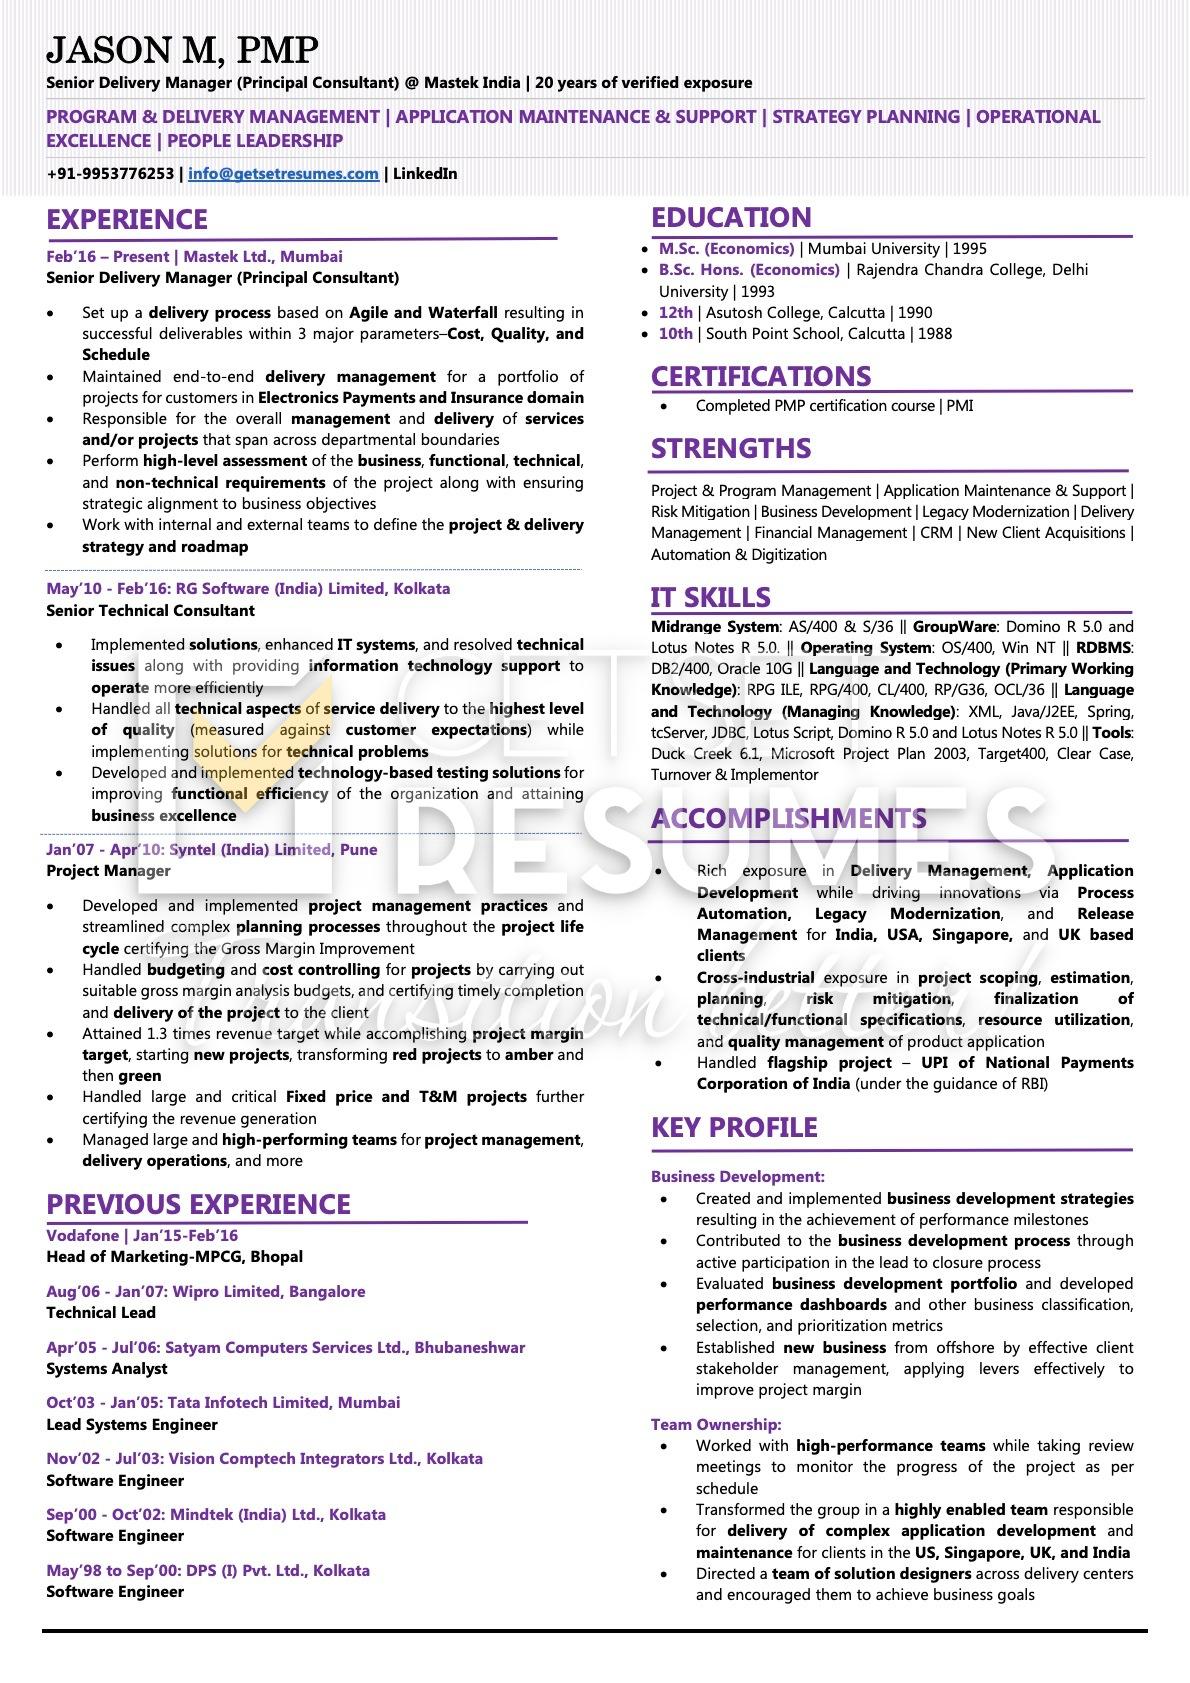 Sample Resume for Senior IT Professional Delivery Manager by GetSetResumes